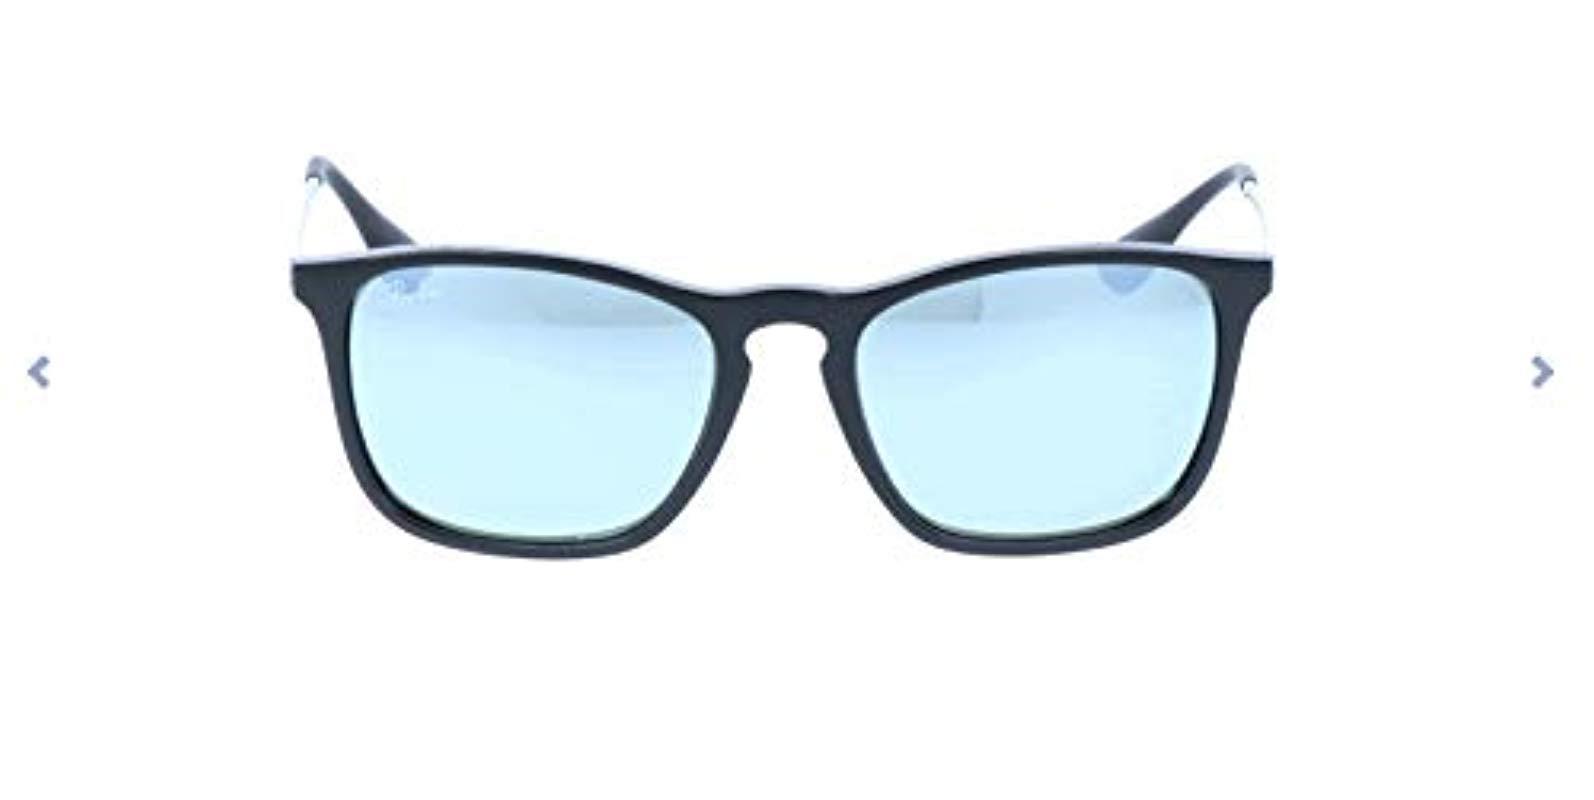 Ray-Ban Rb4187 Chris Square Sunglasses in Black - Lyst